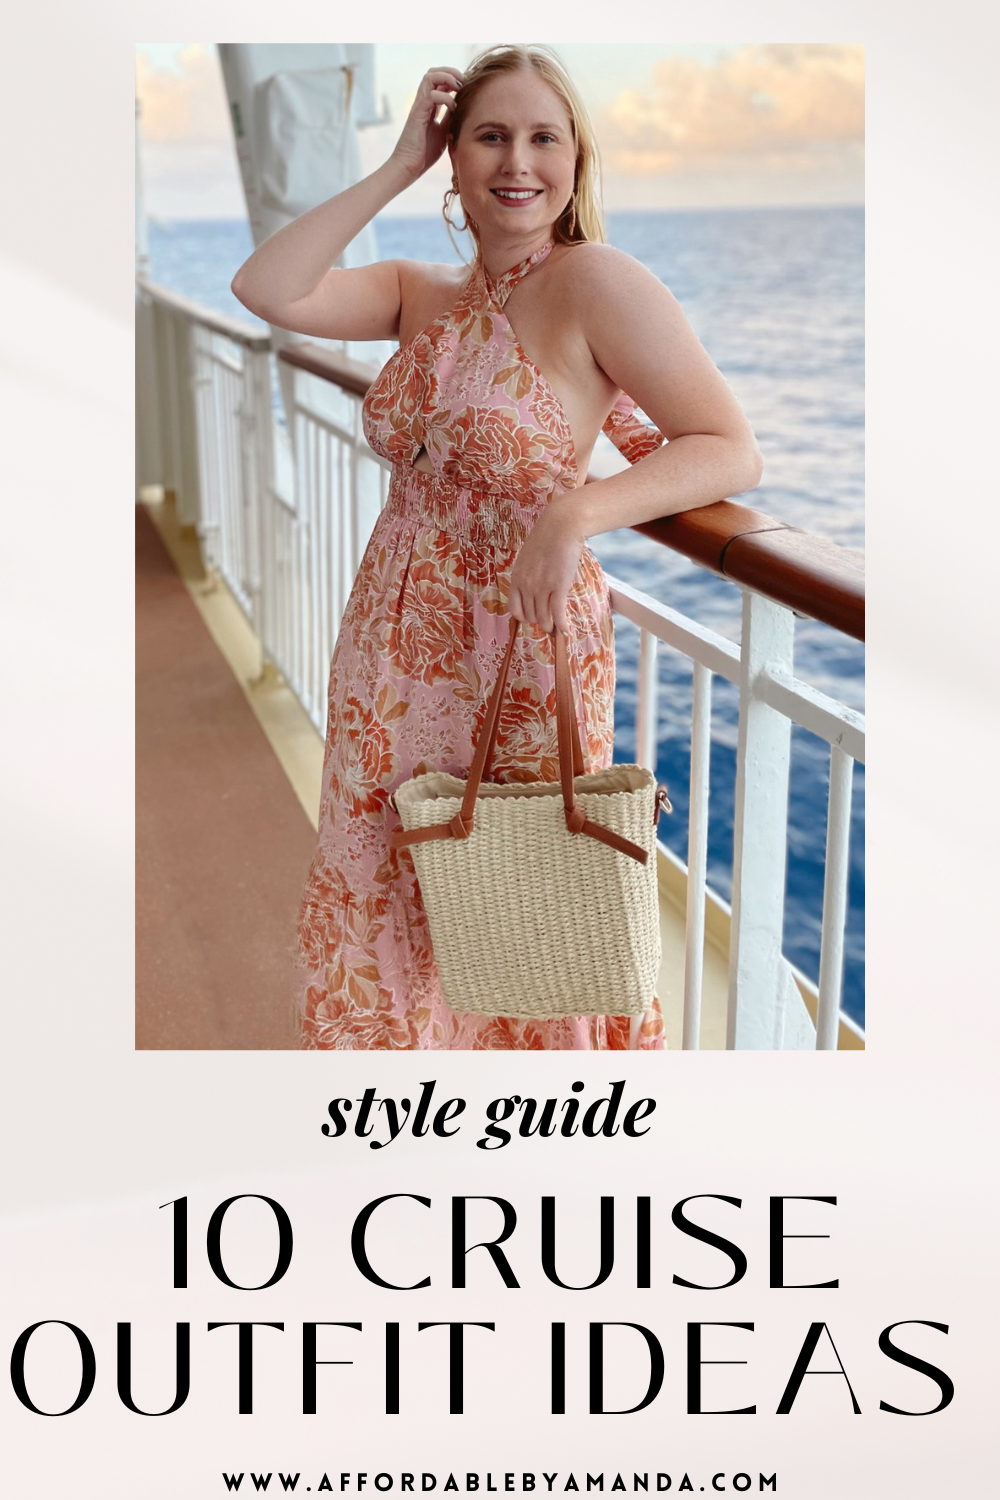 10 Best Cruise Outfits ideas in 2023 - 10 Cruise Outfit Ideas for Women - 10 Day Caribbean Cruise Mid Size Outfit Ideas